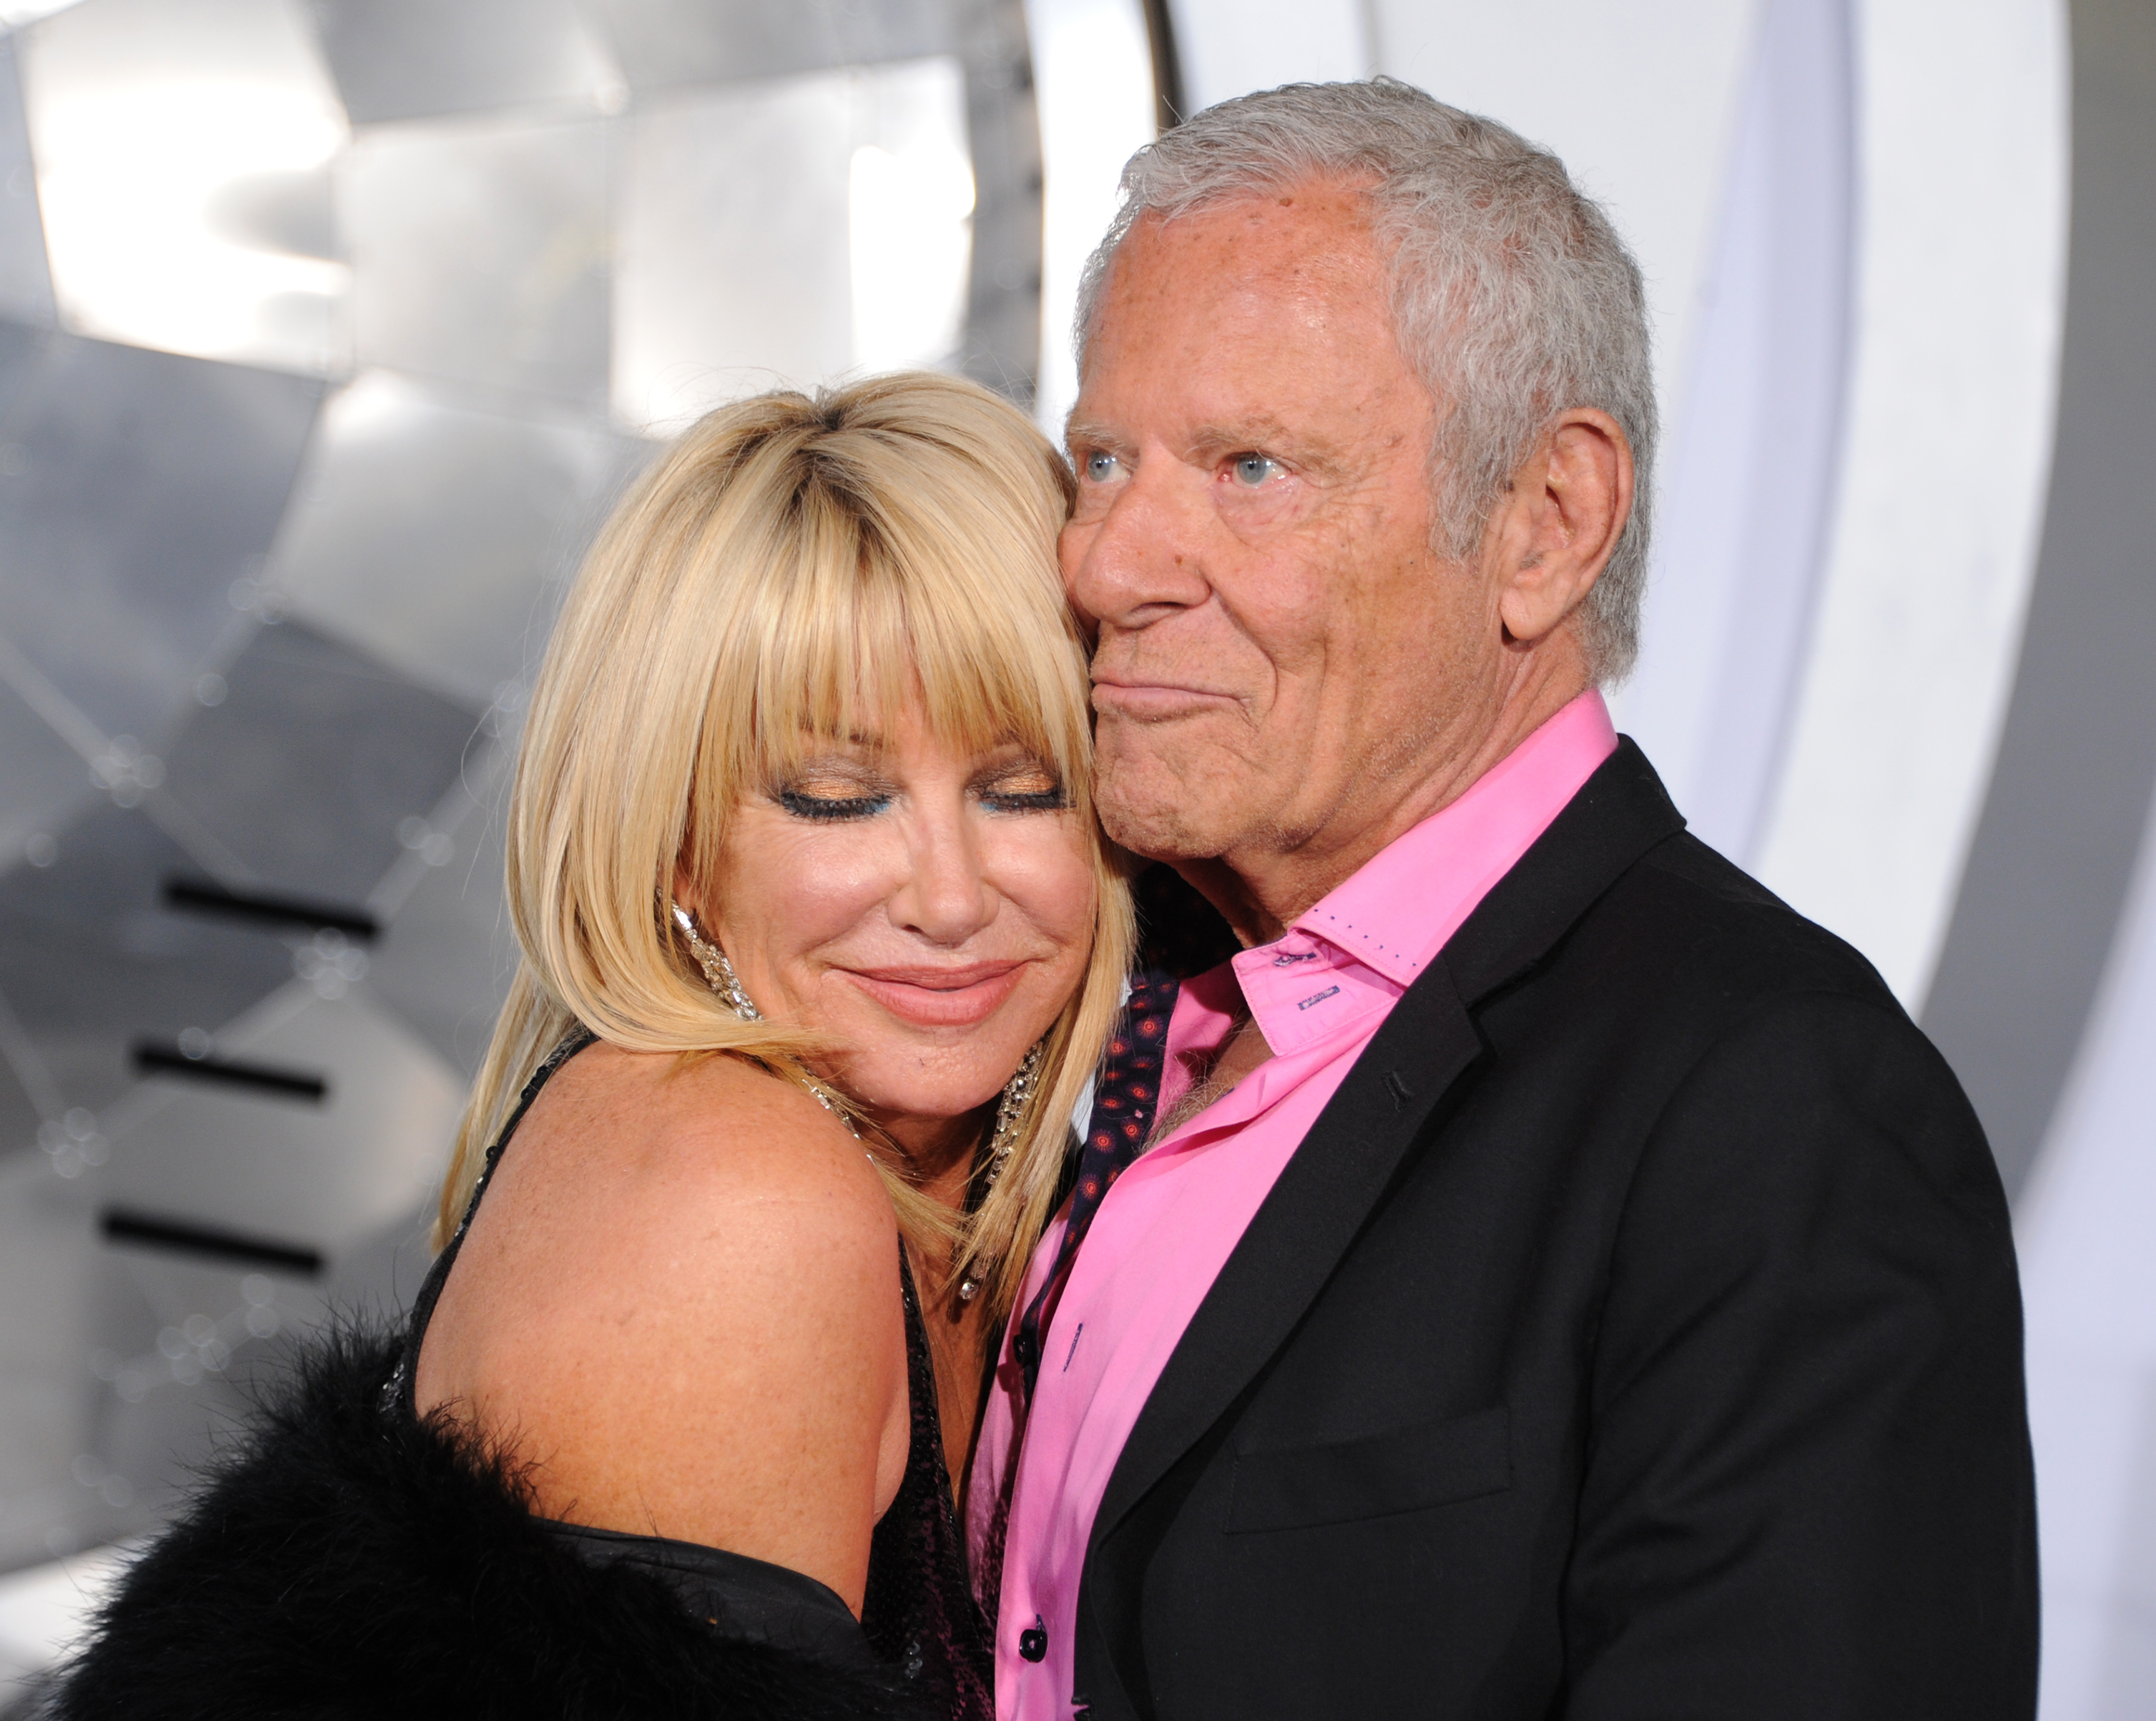 Suzanne Somers and Alan Hamel at the "Passengers" premiere in 2016 | Source: Getty Images